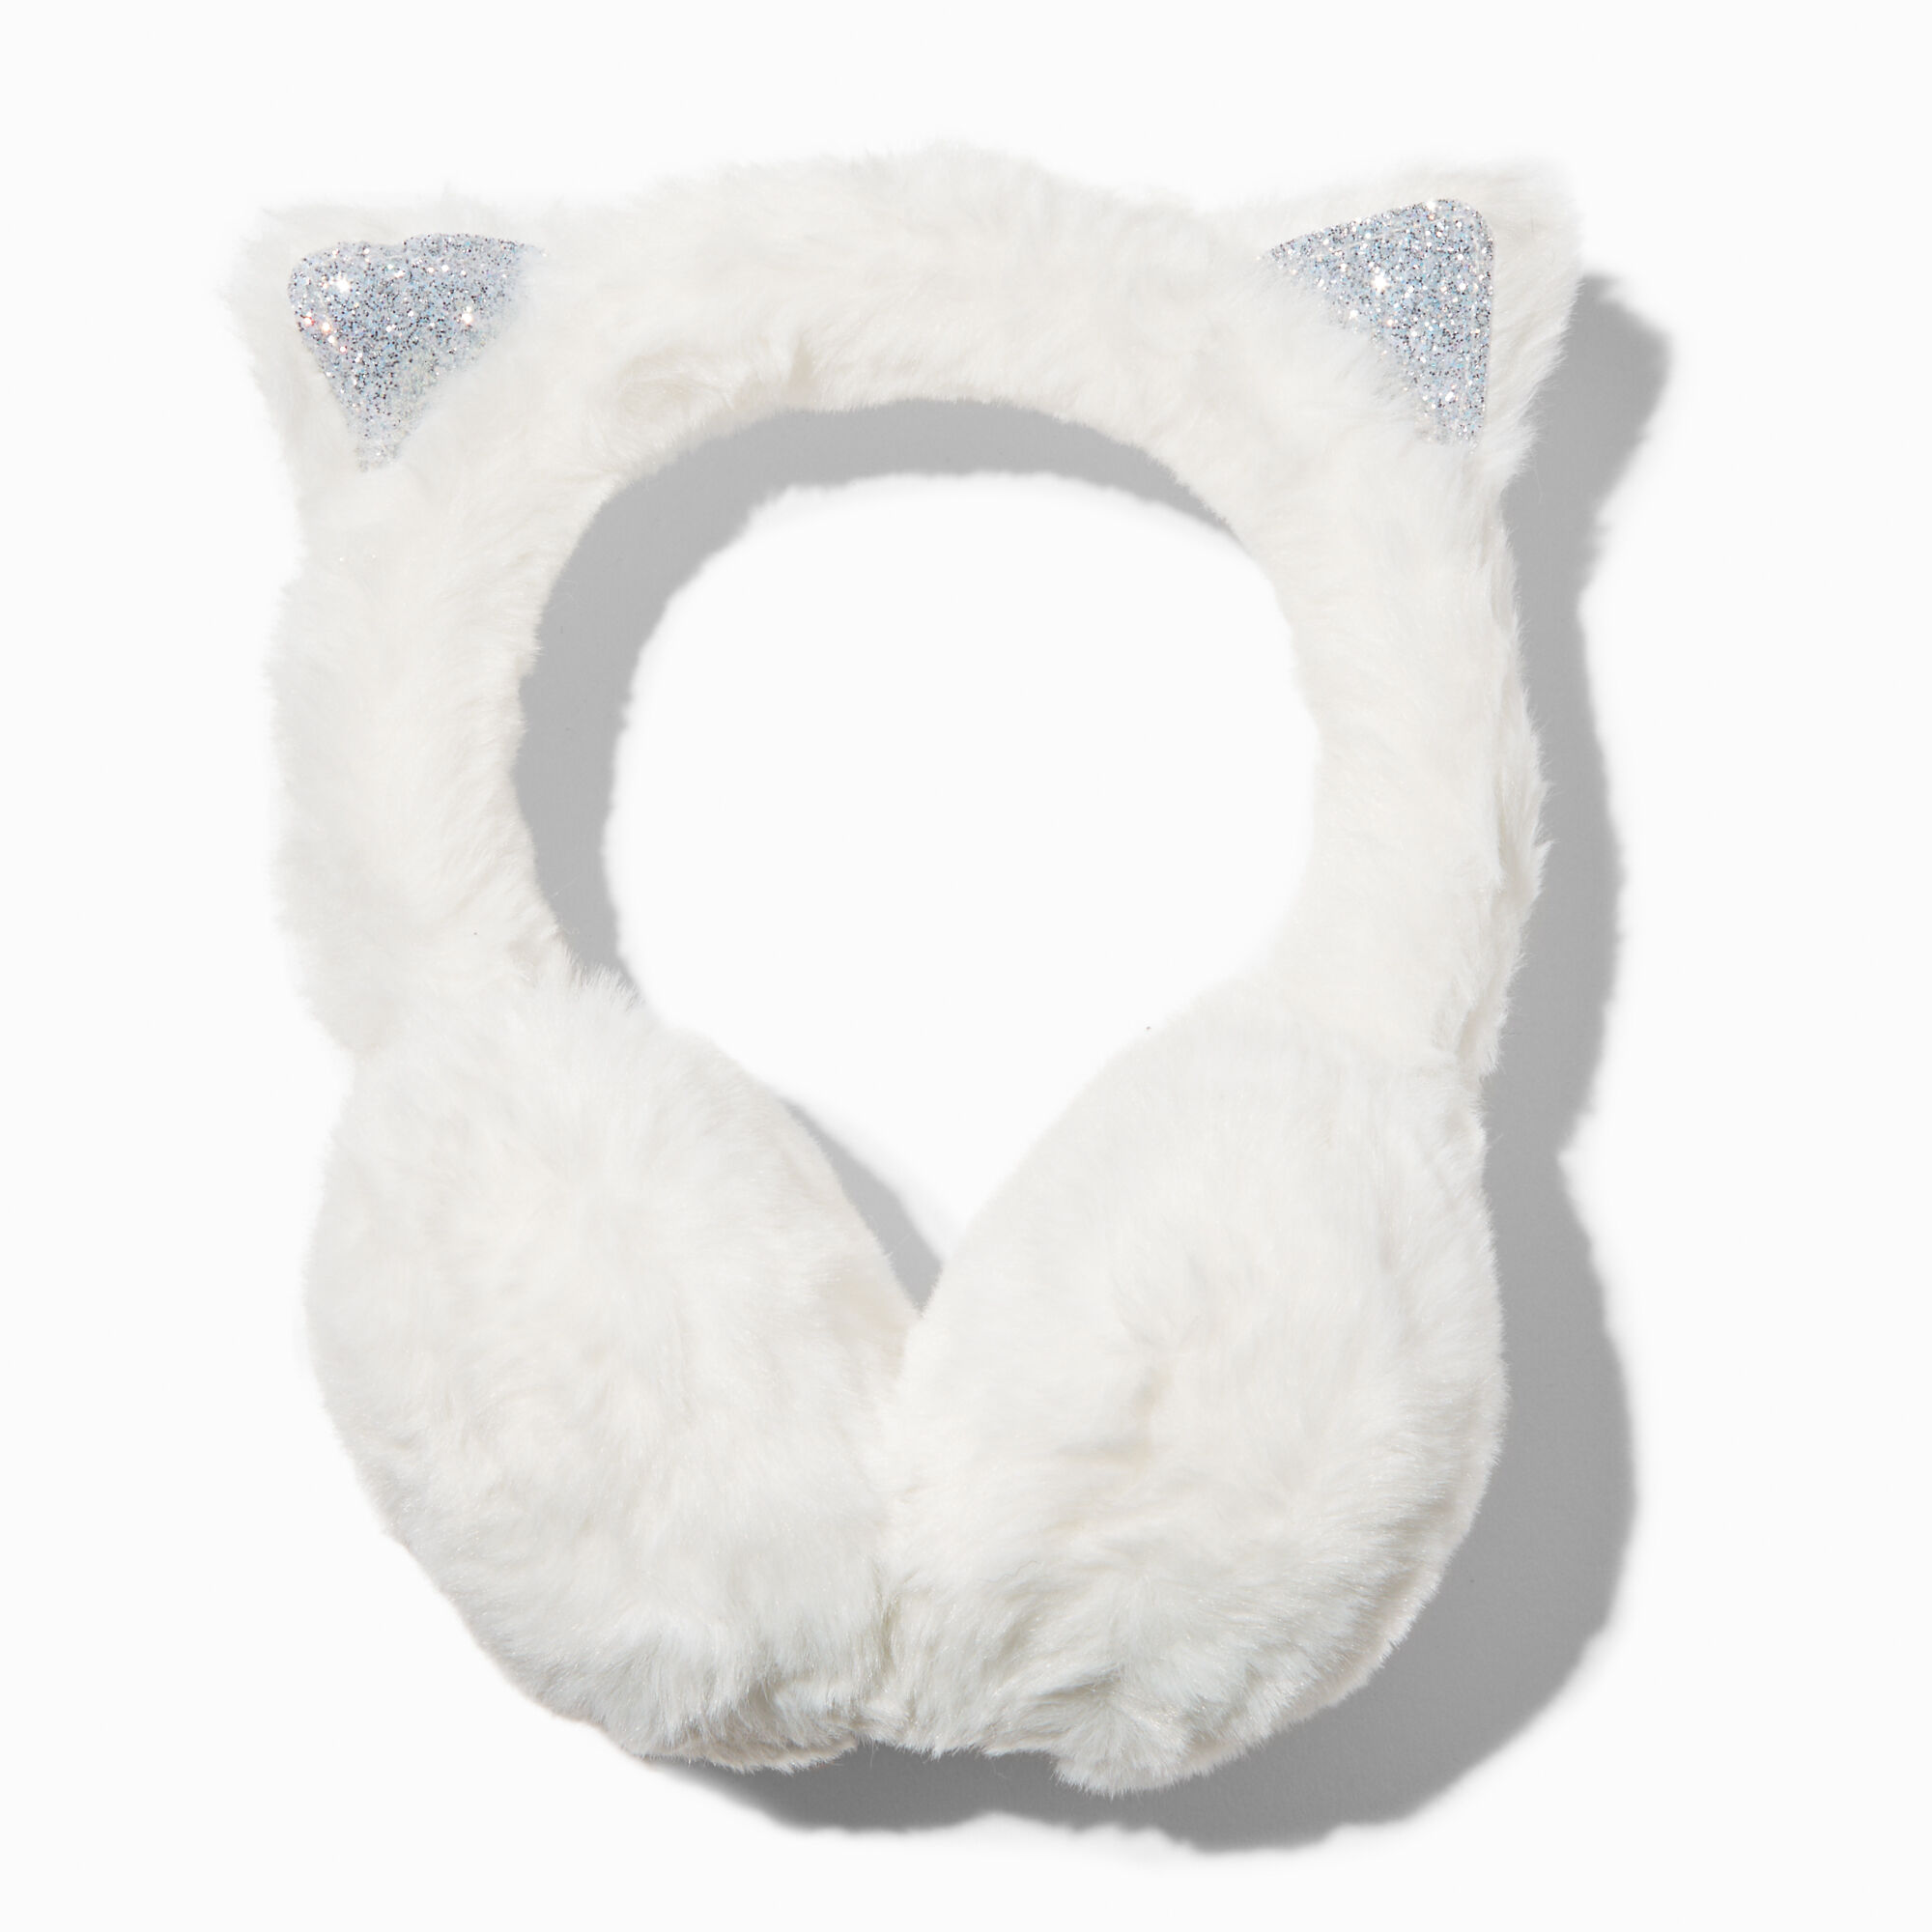 View Claires Cat Earmuffs White information